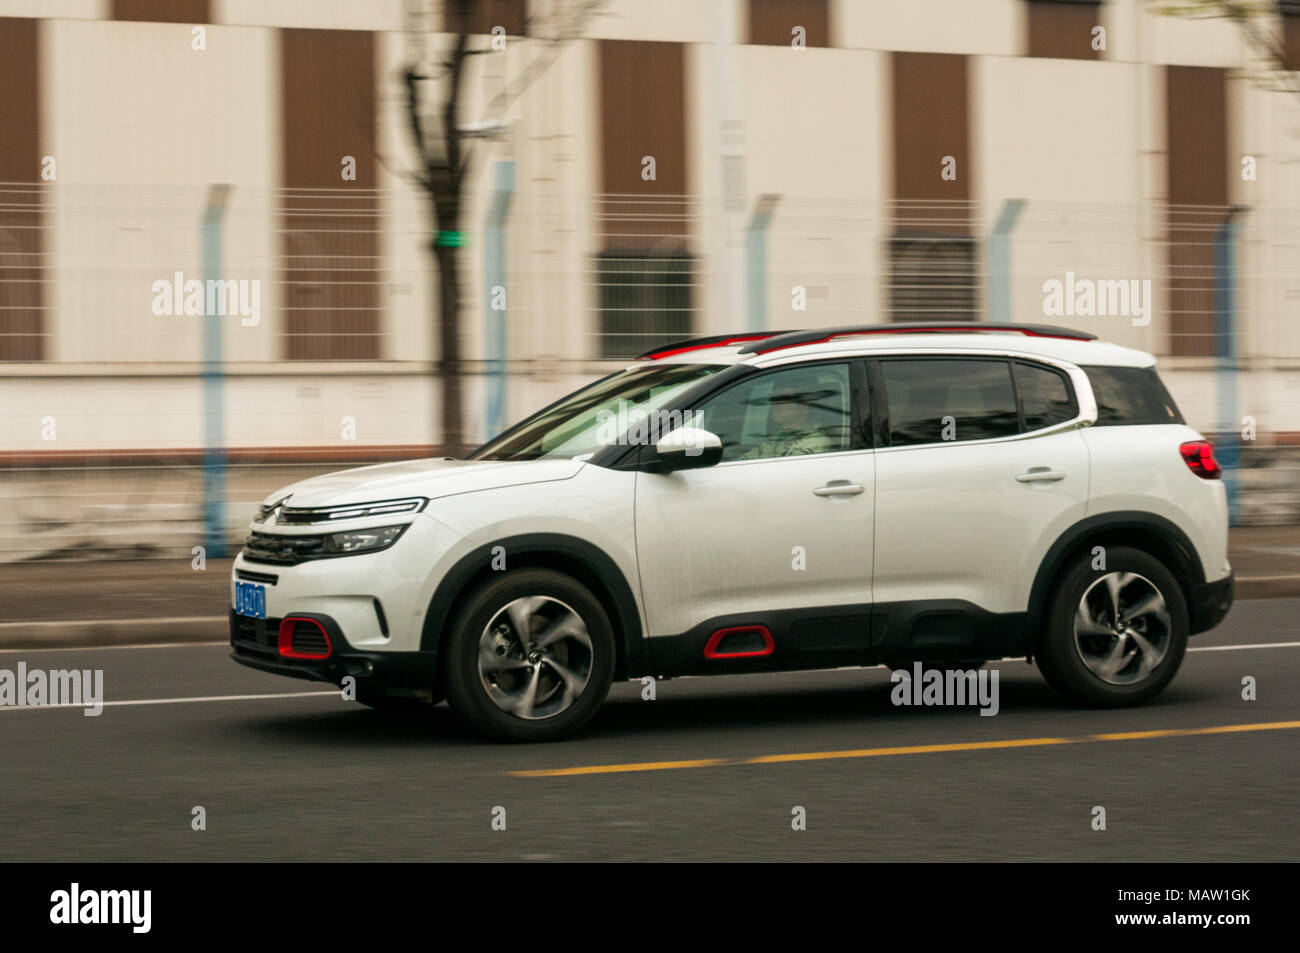 Citroen C5 Aircross being driven on a road near the former World Expo park as on a test drive in Shanghai, China. Stock Photo